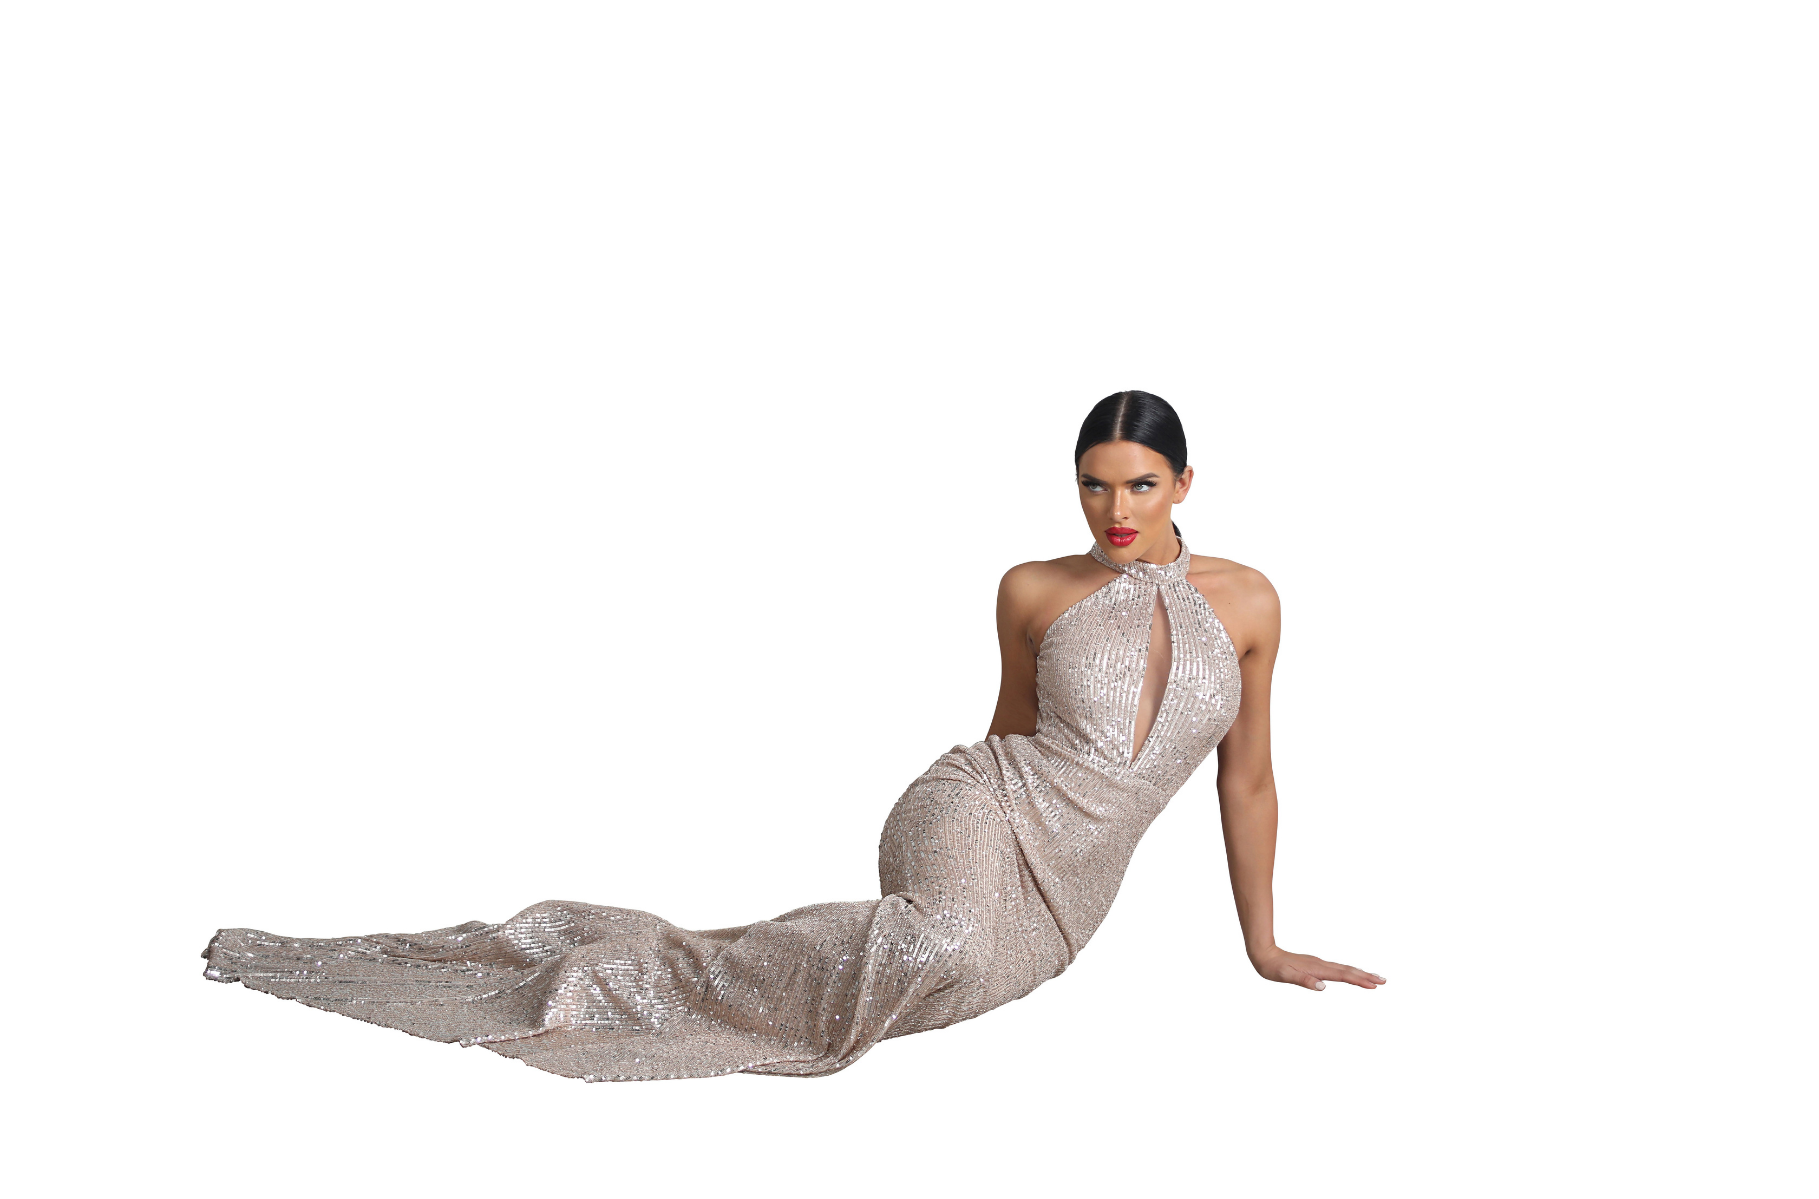 Model wearing an evening dress sitting on the floor